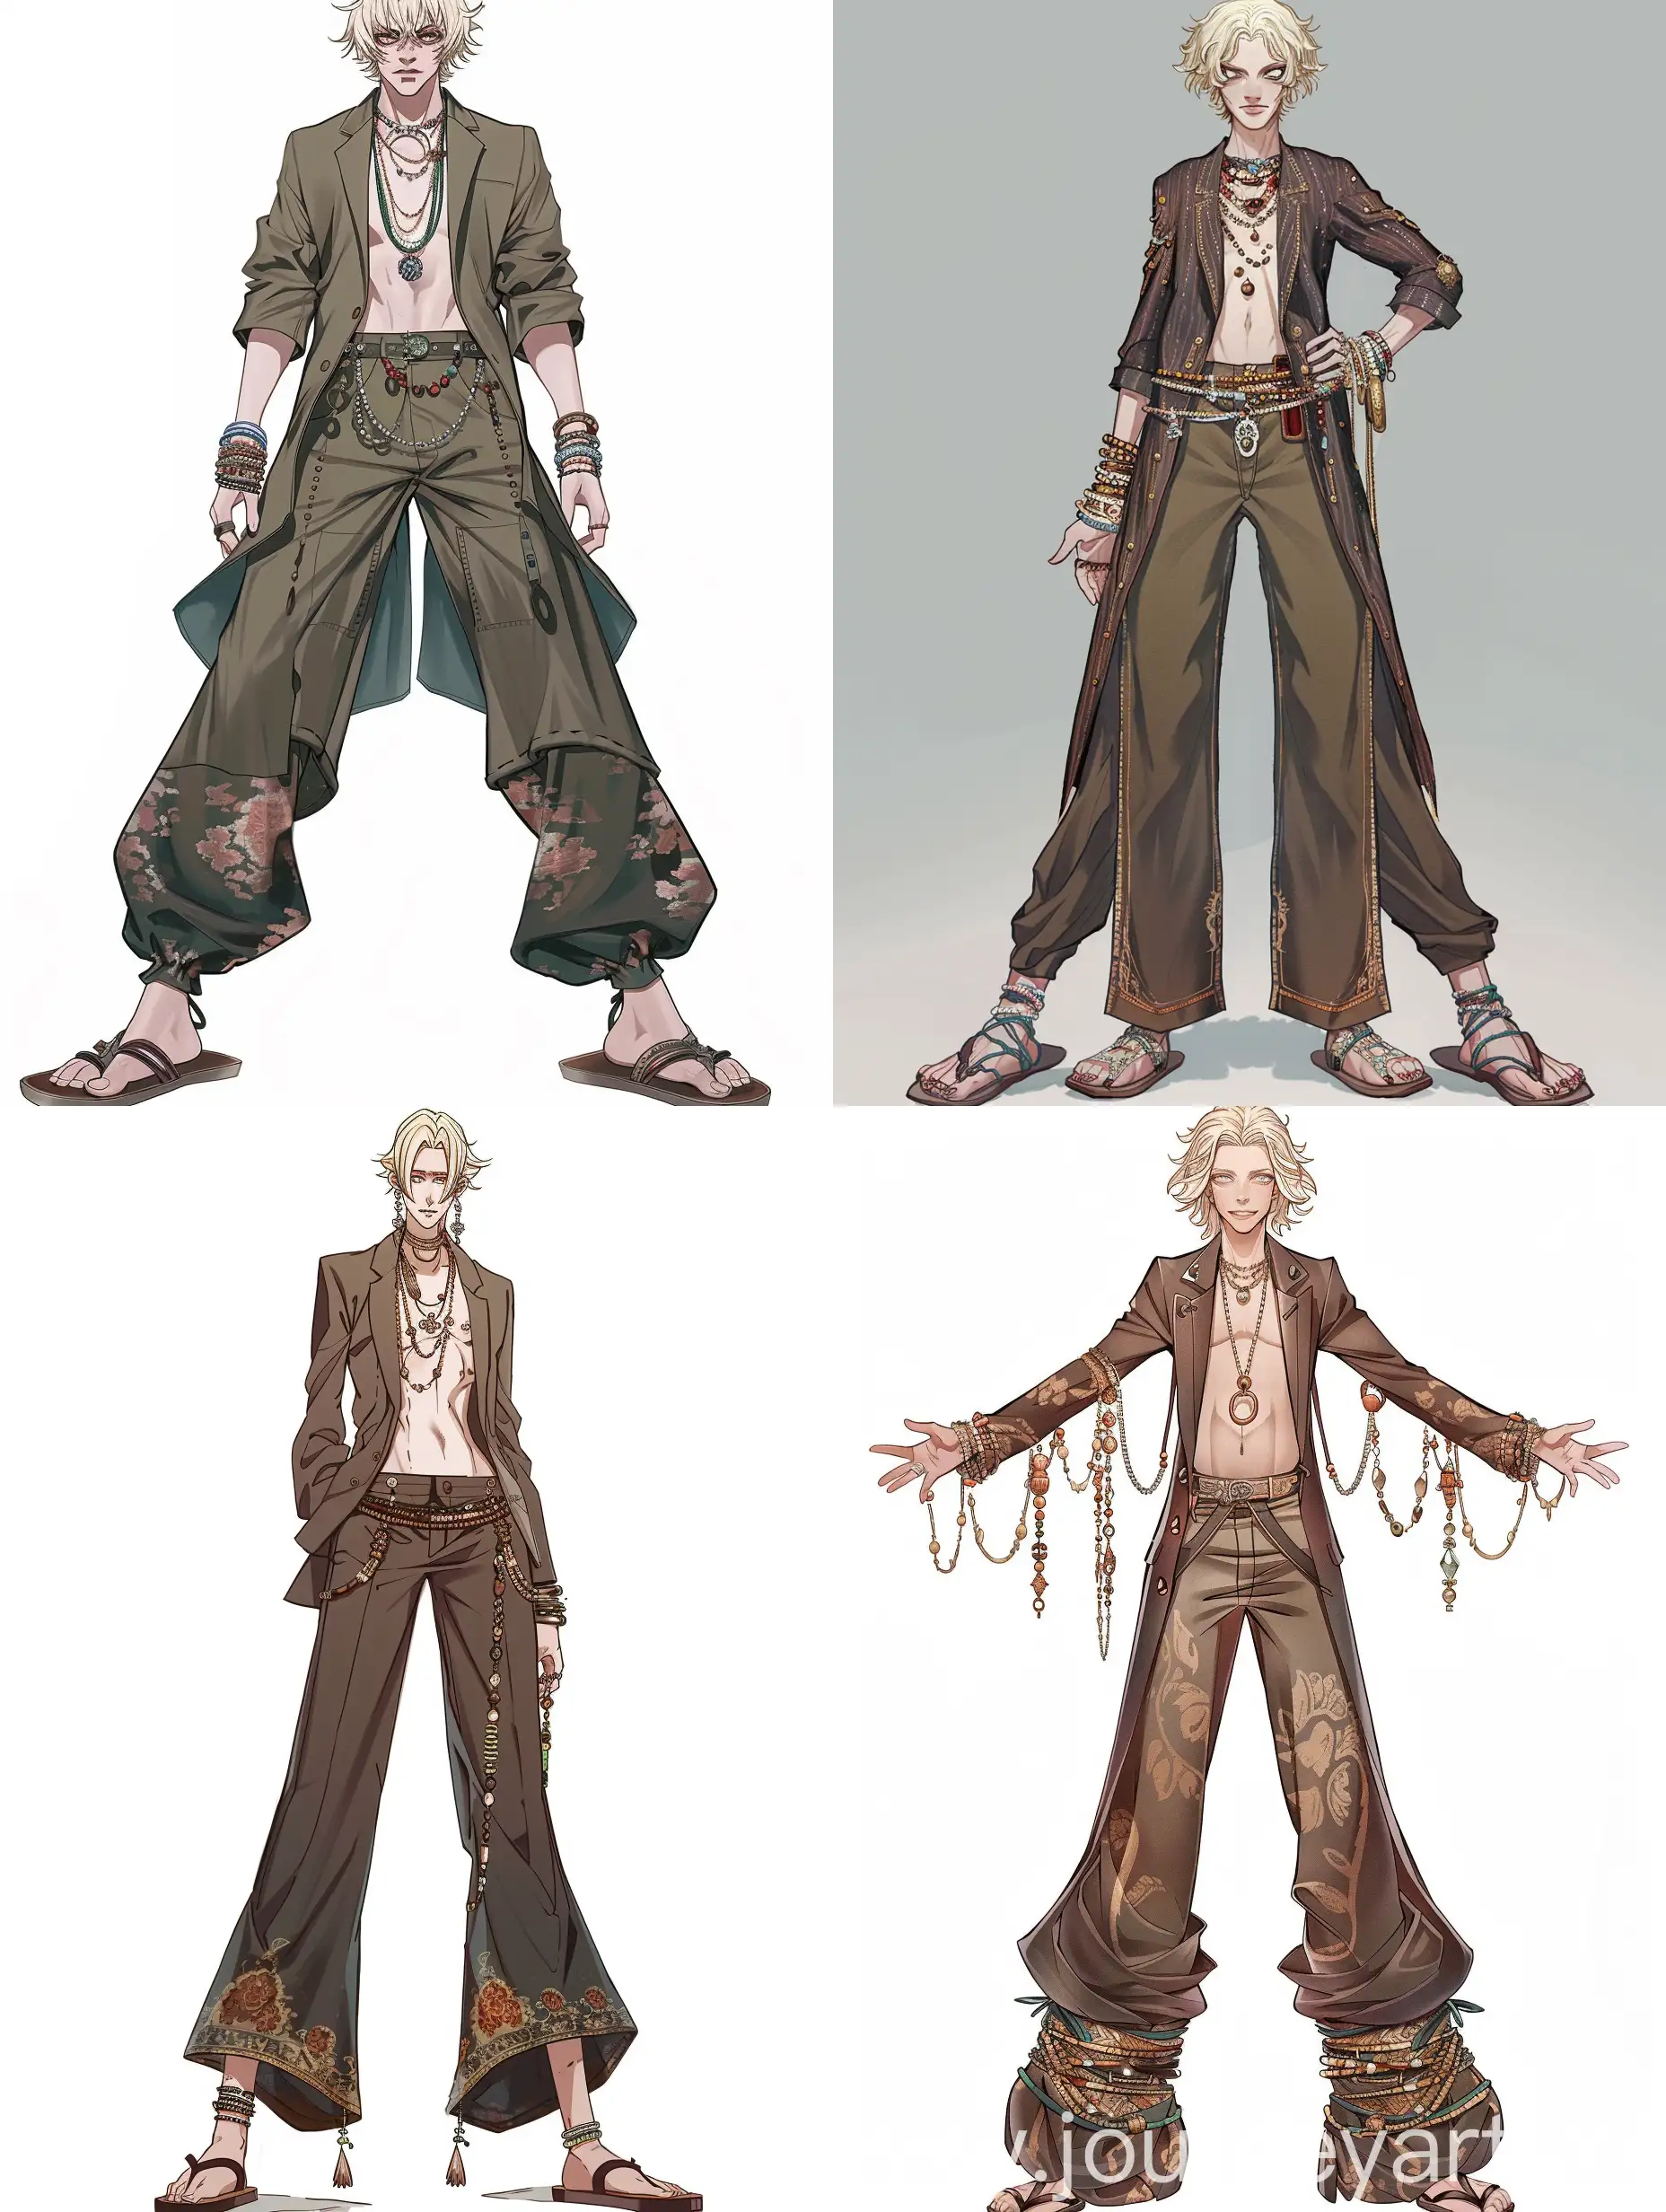 Slender-Blond-Man-in-RussianStyle-Suit-with-Hippie-Accents